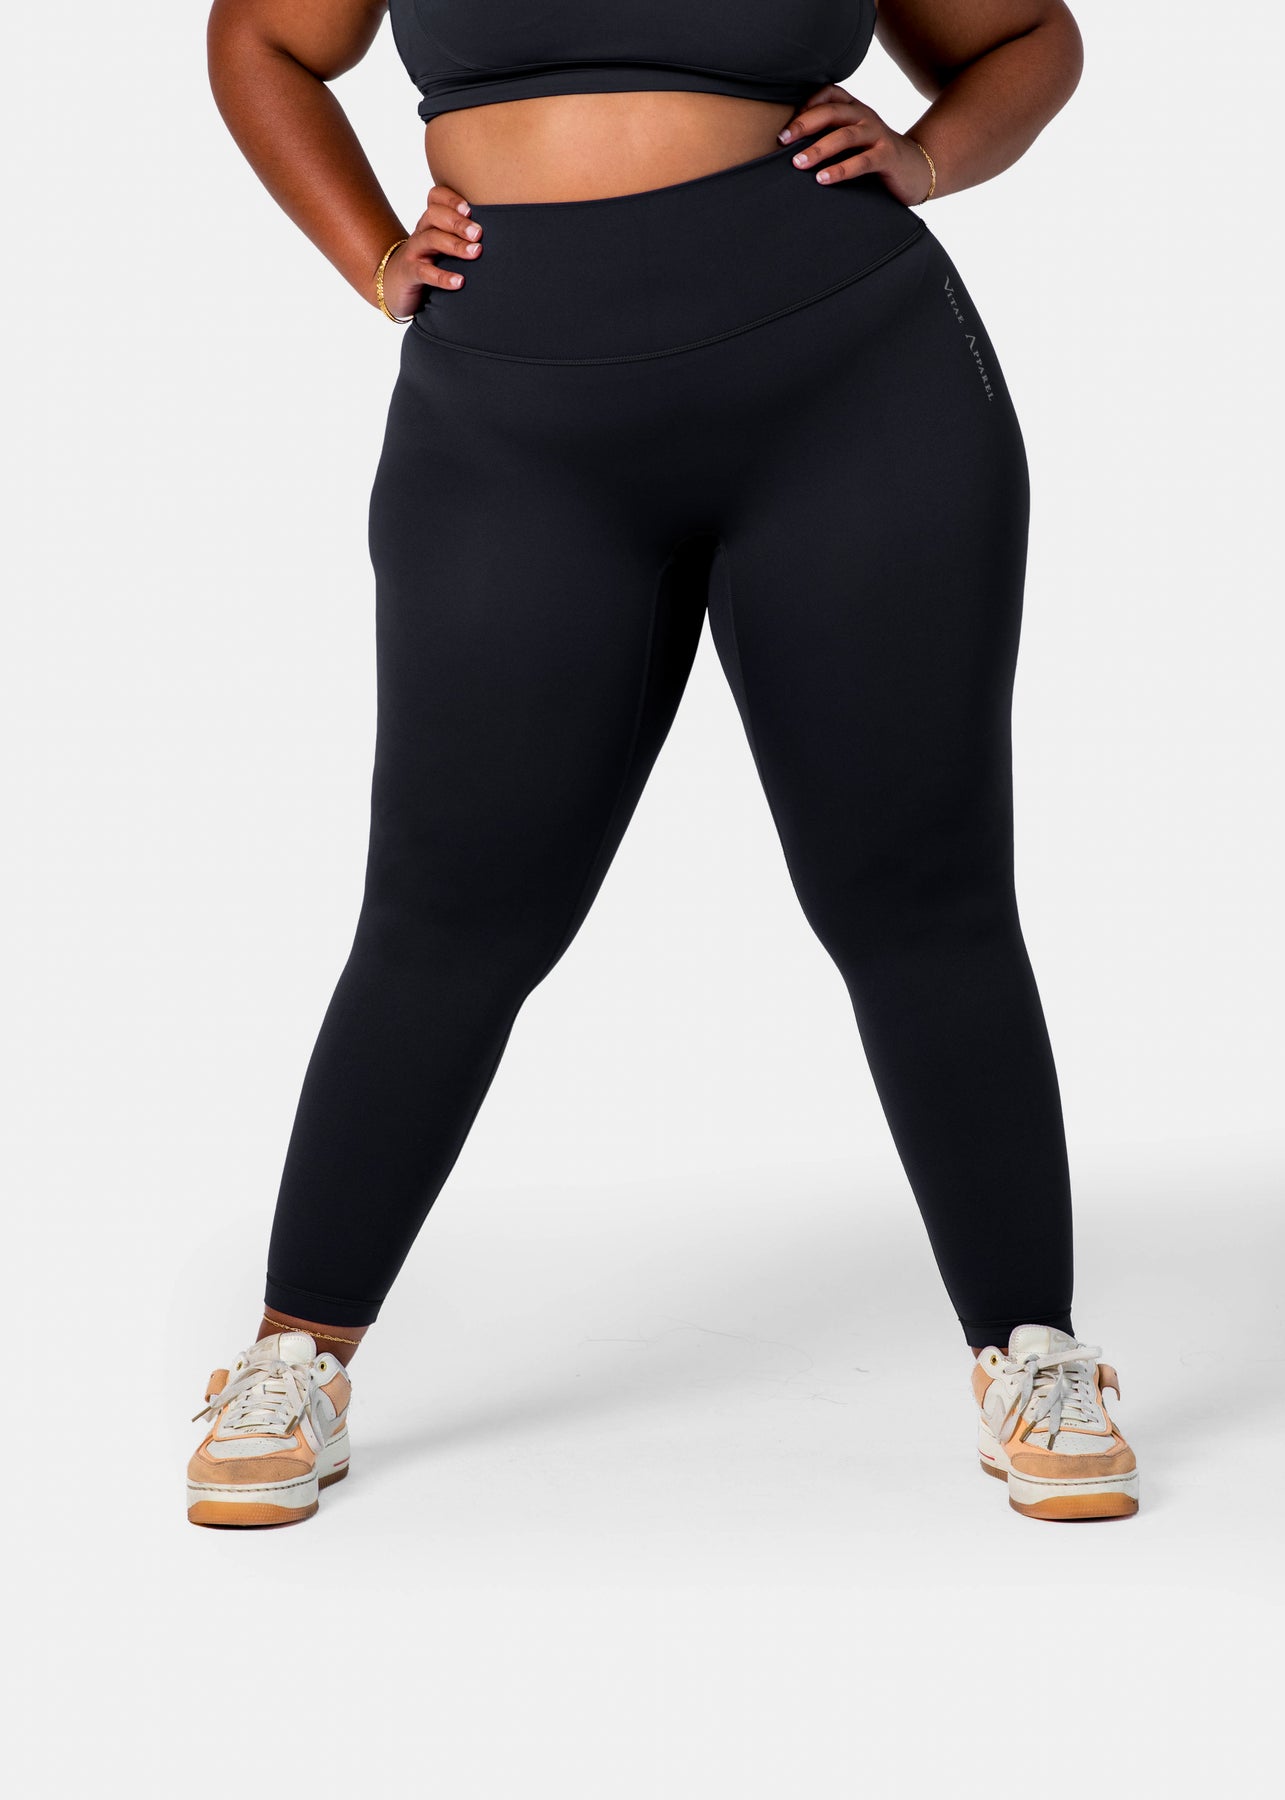 Women's Premium Athletic Apparel from Vitality – Tagged seamless legging